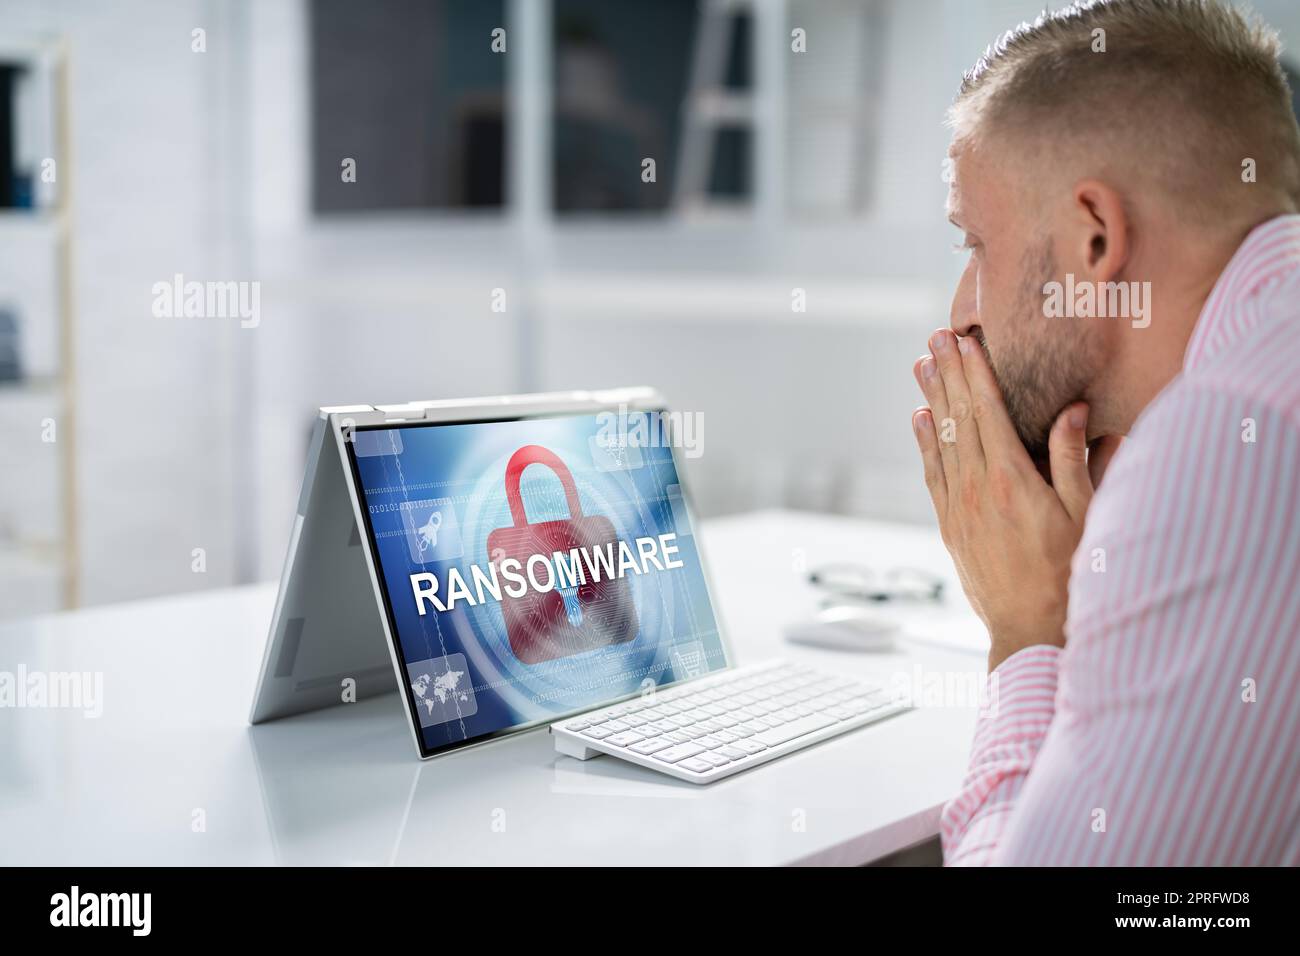 Ransomware-Malware-Angriff. Business-Computer Wurde Gehackt Stockfoto